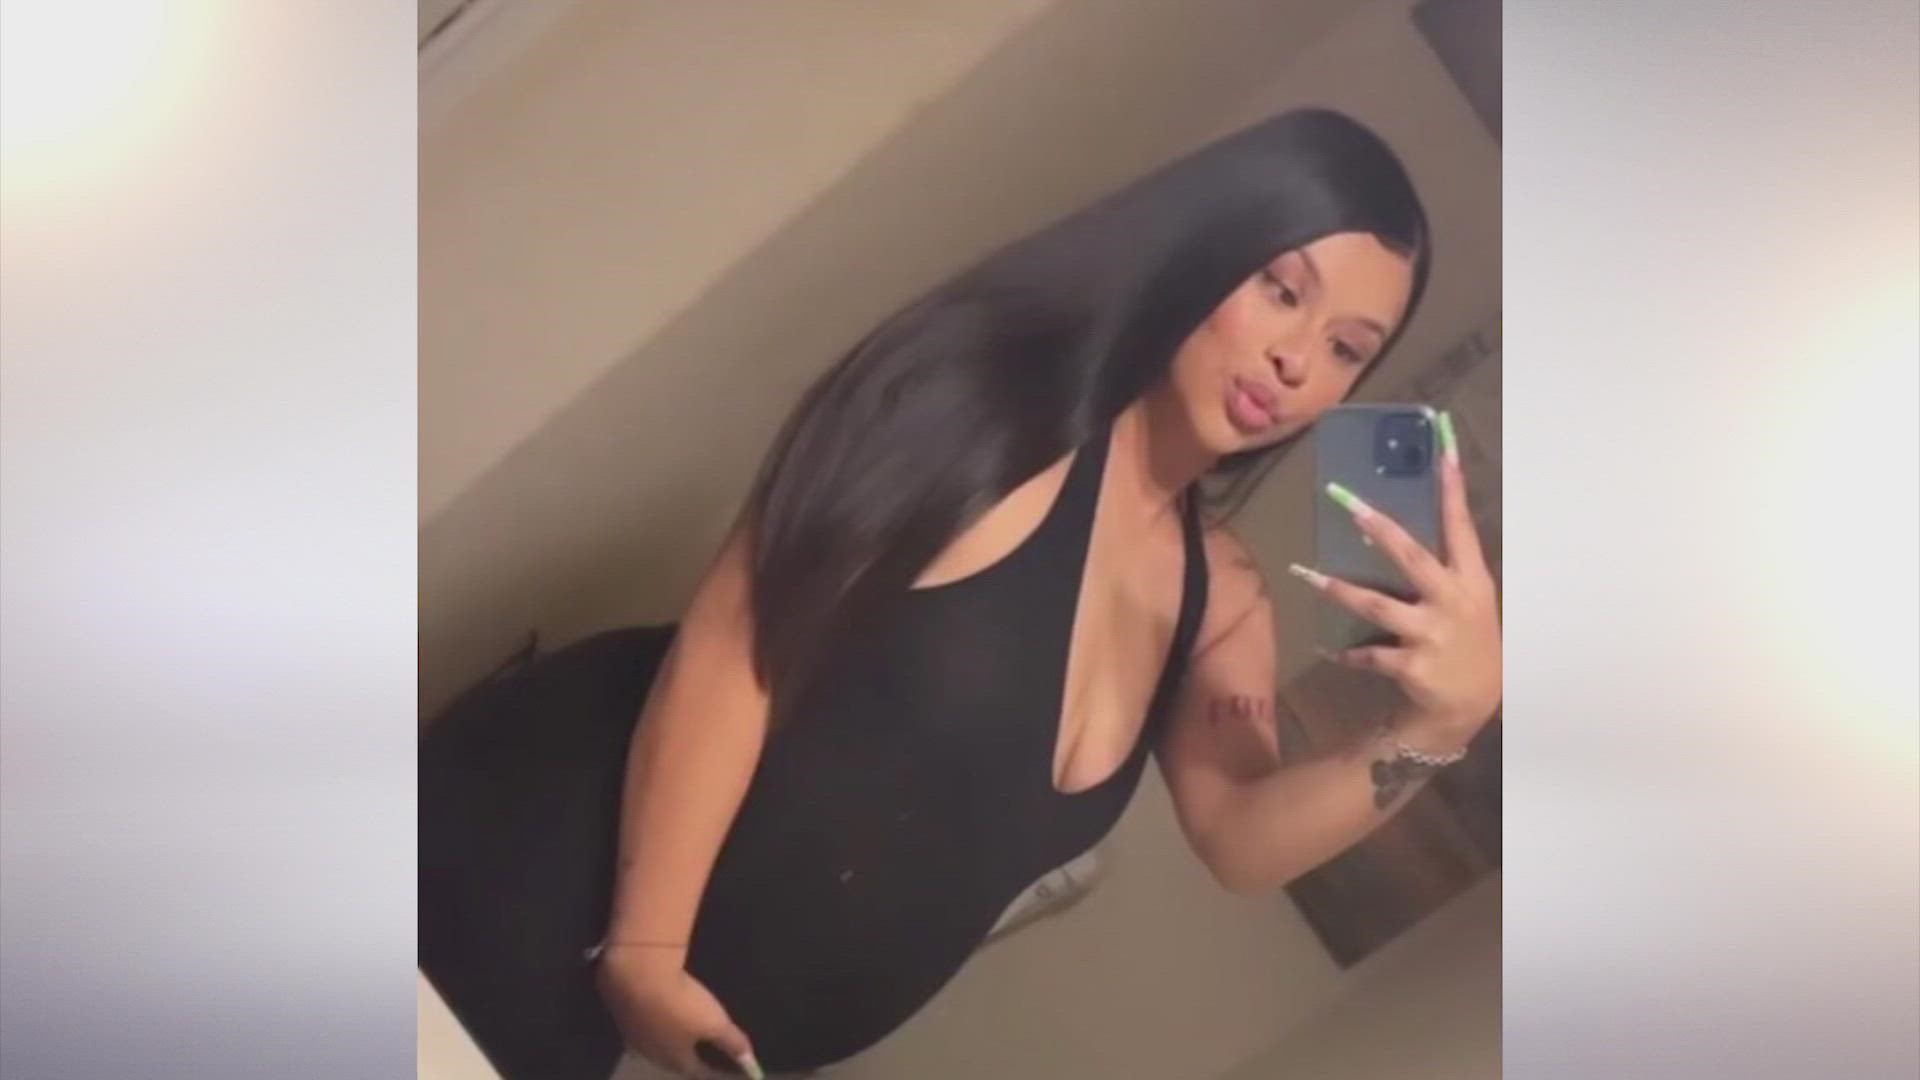 Jennifer Hernandez, 20, was eight months pregnant when she and her boyfriend were shot Friday in north Harris County, HCSO said.